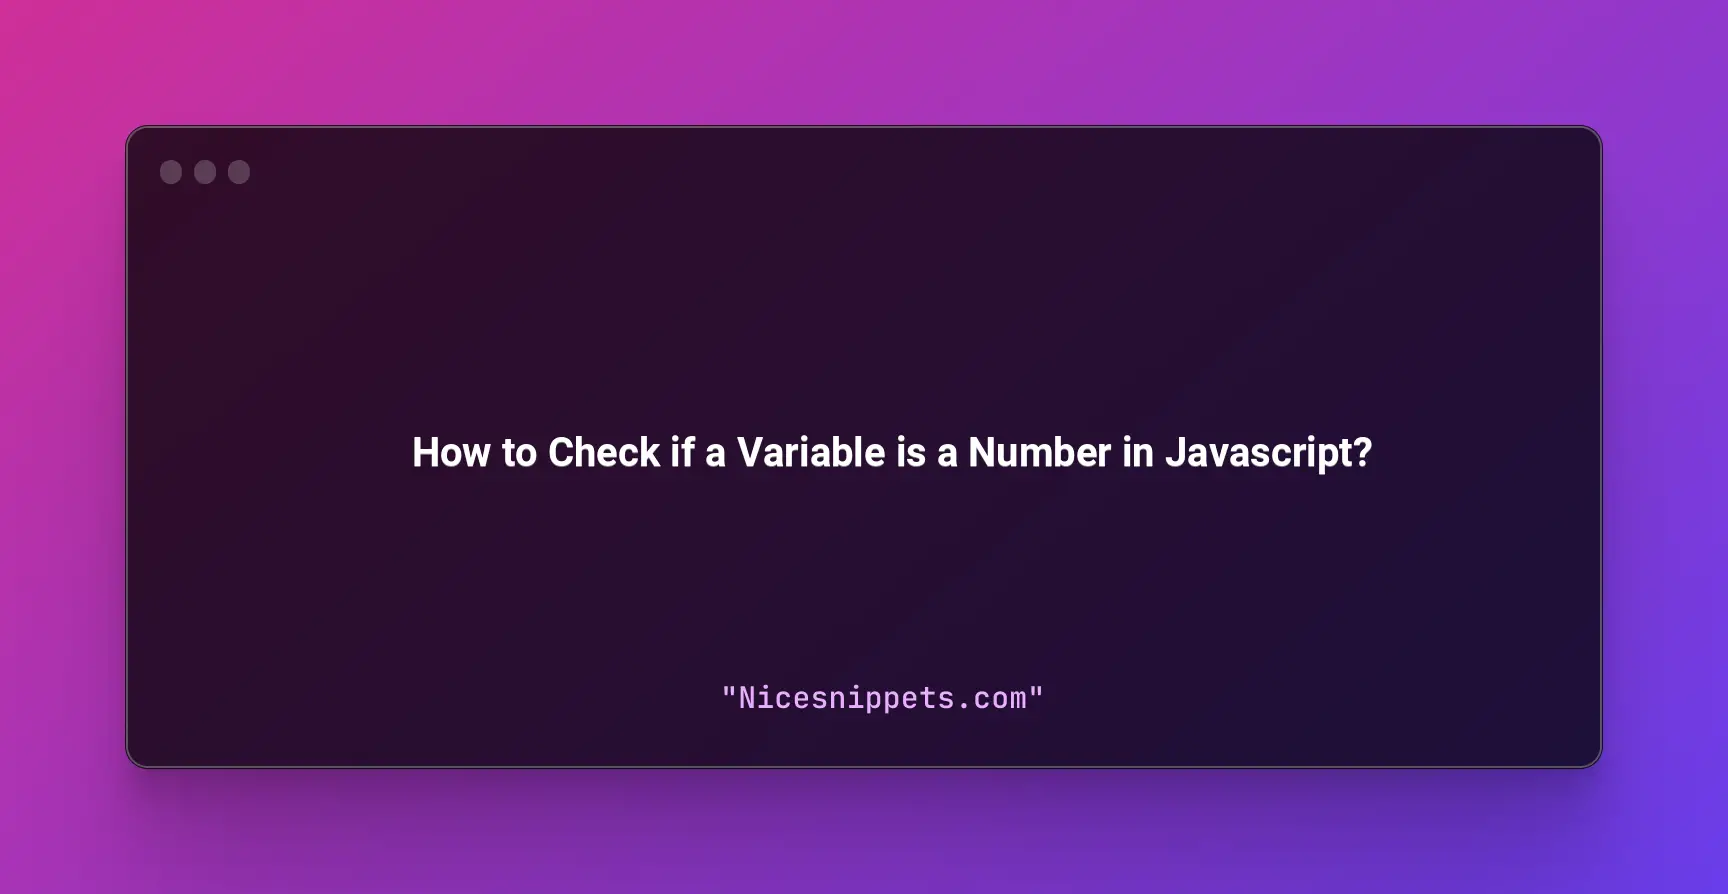 How to Check if a Variable is a Number in Javascript?